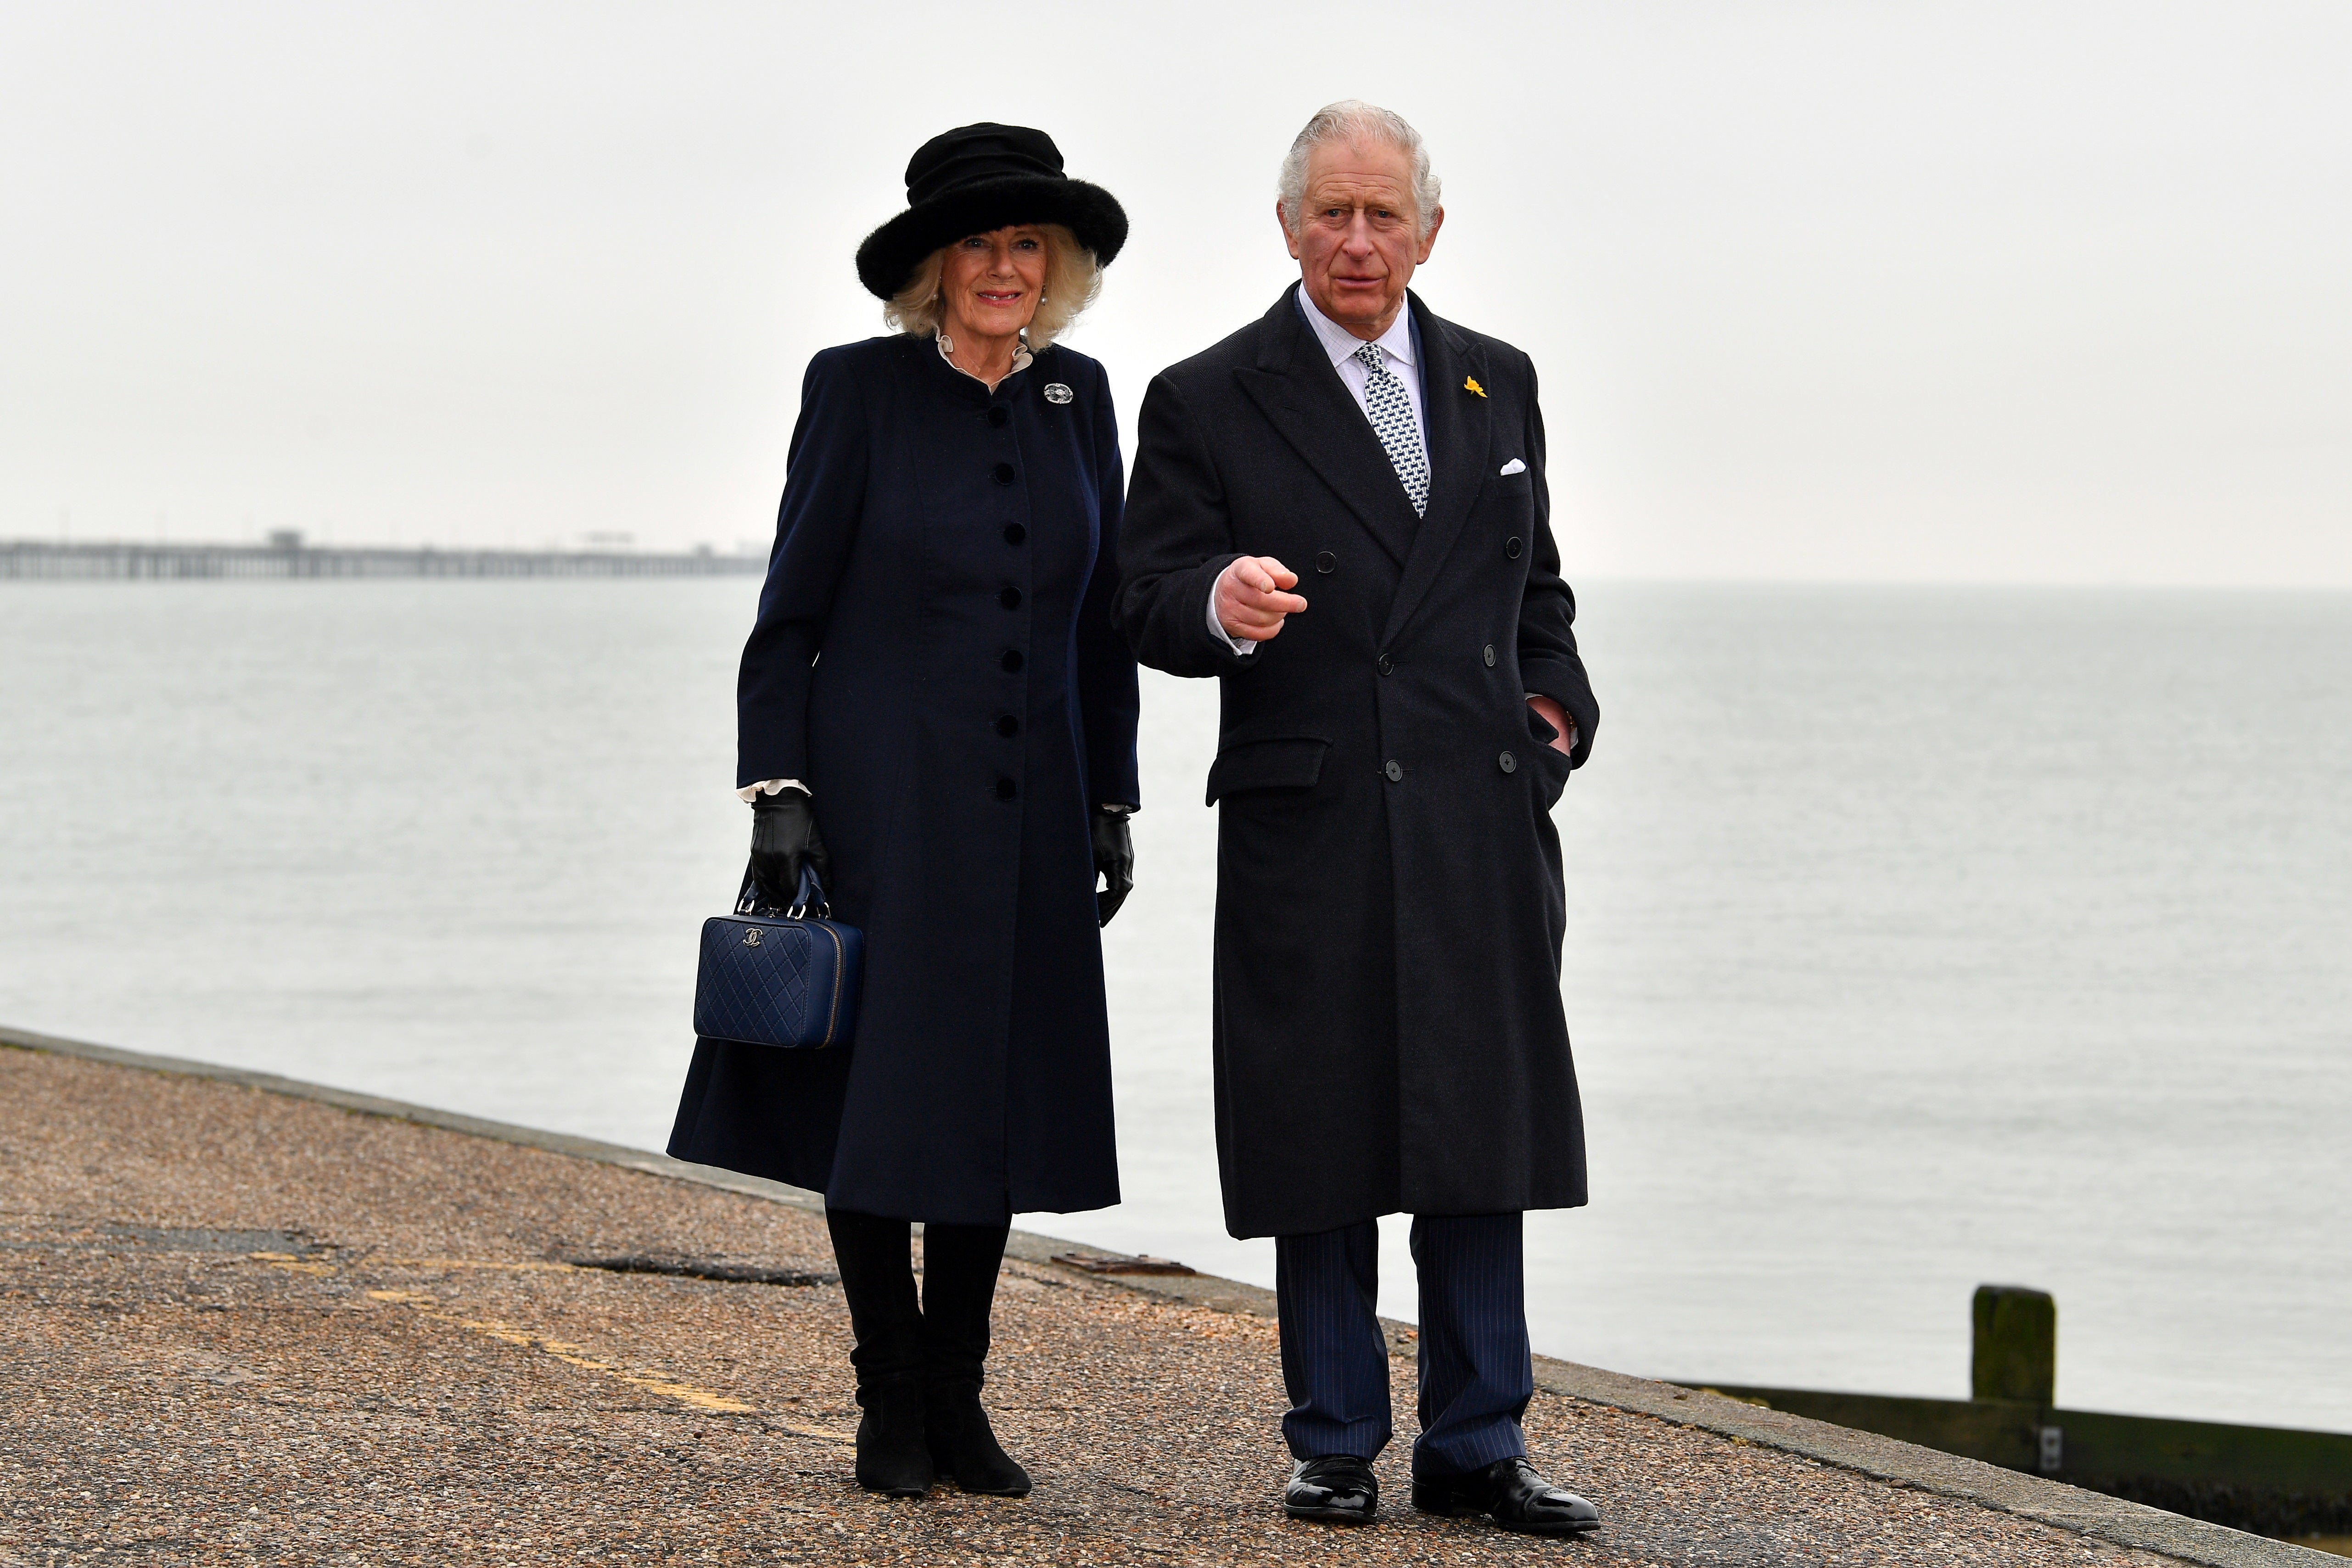 The Prince of Wales and Duchess of Cornwall pose for pictures during a visit to the seafront at Southend-on-Sea in Essex (Justin Tallis/PA)